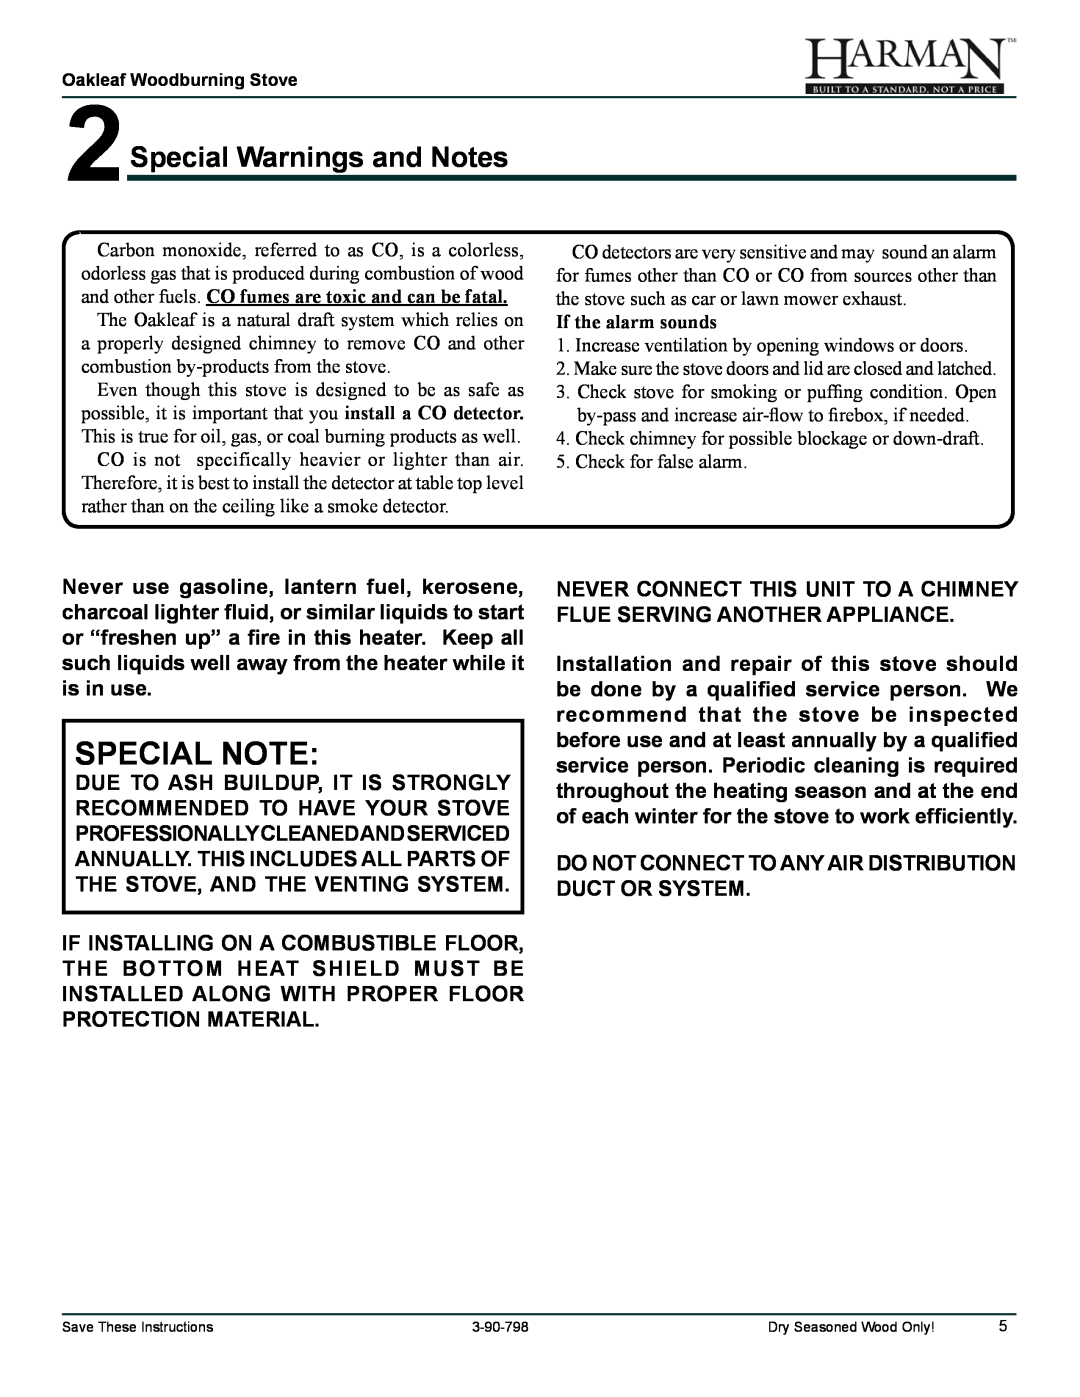 Harman Stove Company 1-90-79700 owner manual Special Note, 2Special Warnings and Notes 